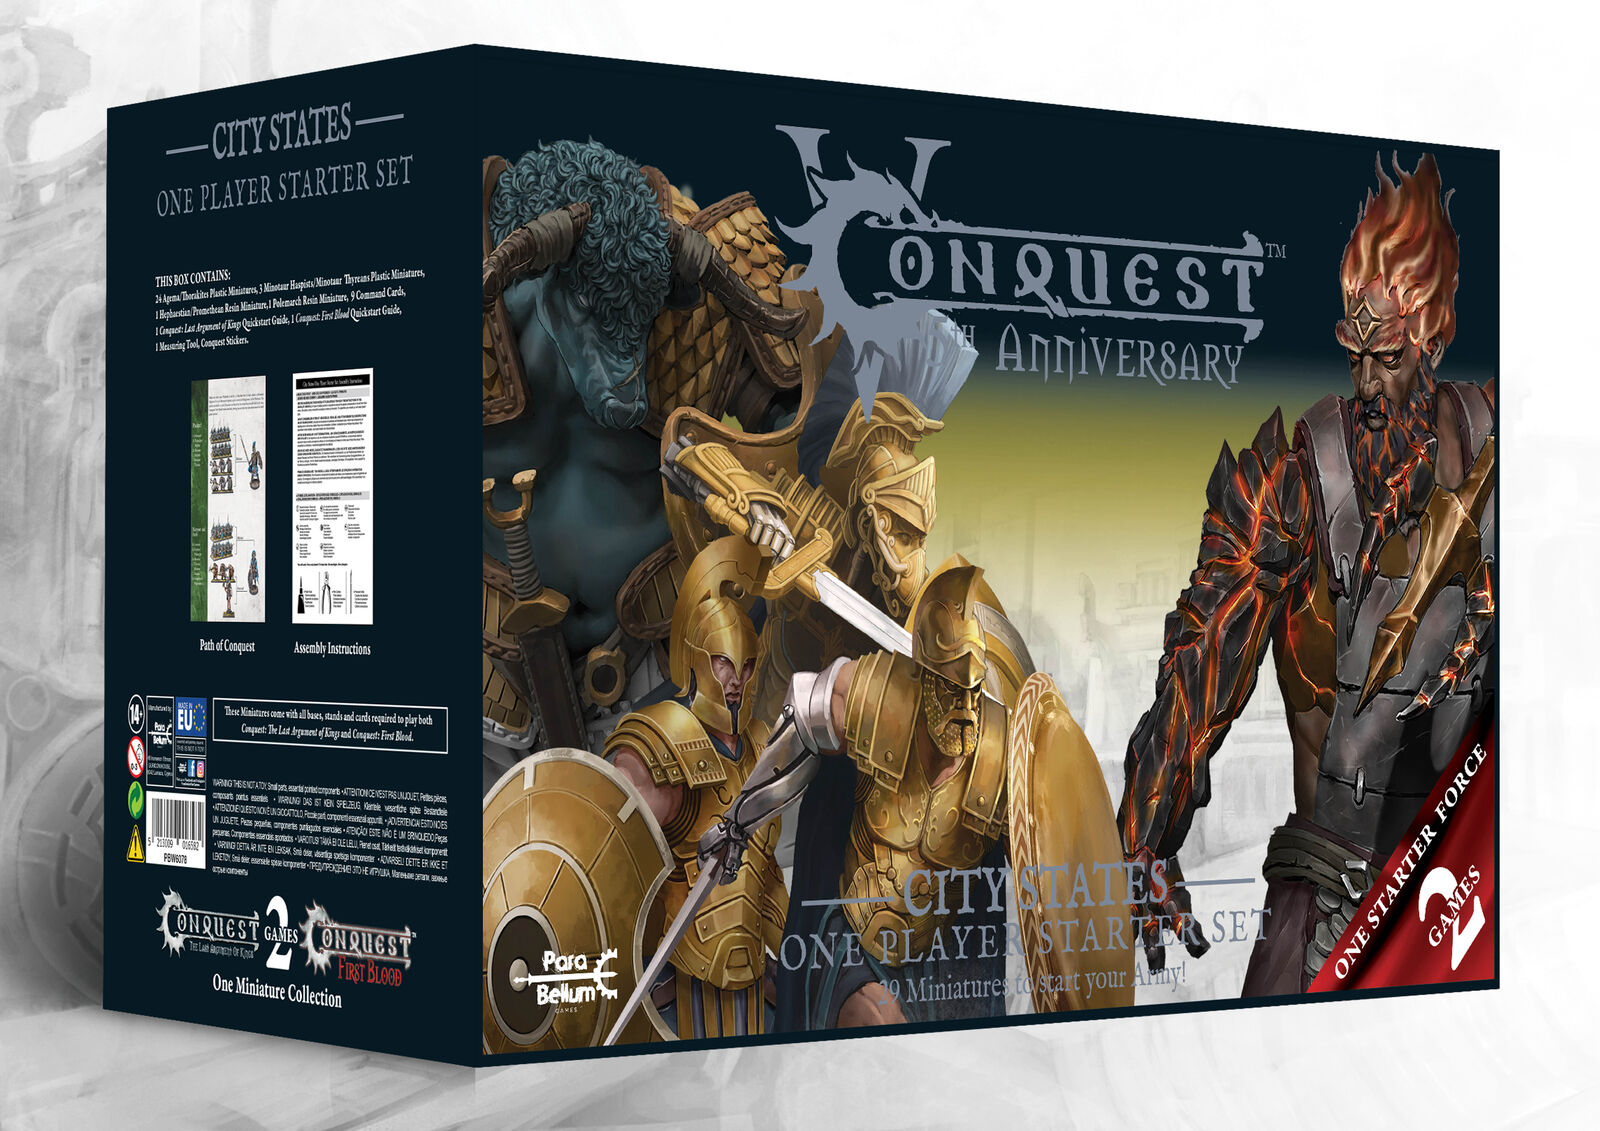 Conquest, City States - Conquest 5th Anniversary Supercharged Starter Set